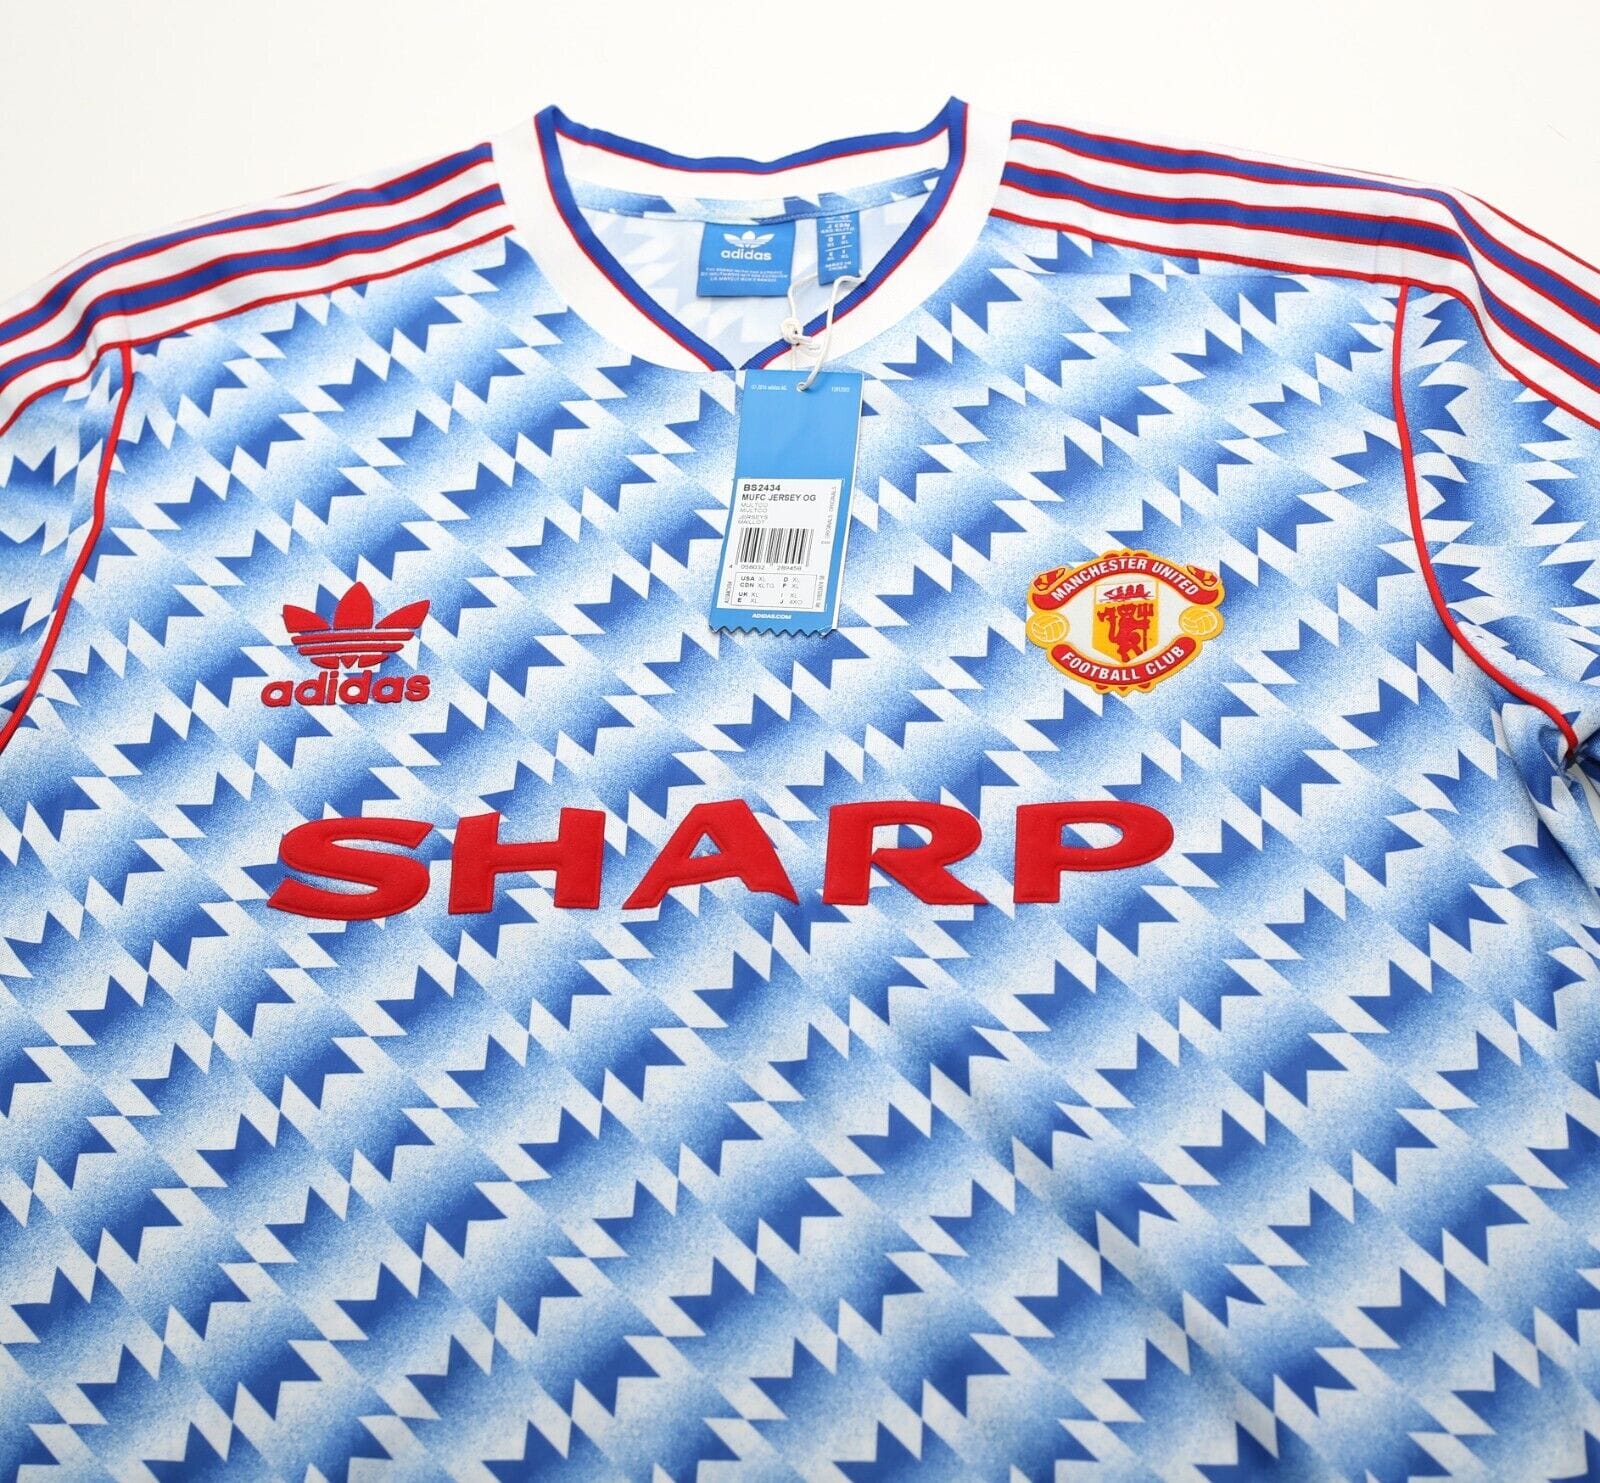 manchester united jersey 1990